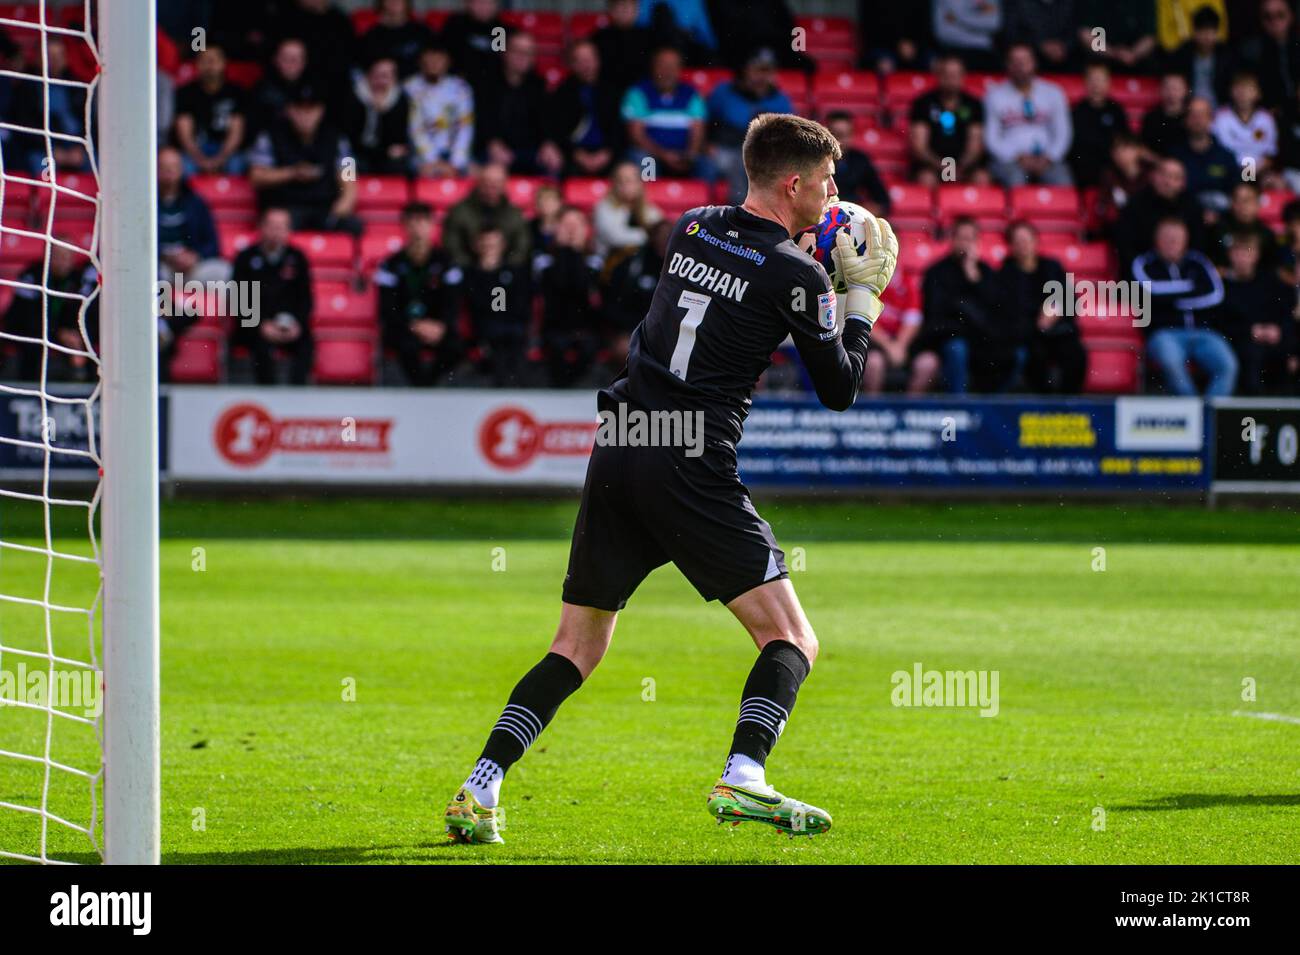 Ross Doohan of Tranmere Rovers makes a save during the Sky Bet League 2 match between Salford City and Tranmere Rovers at Moor Lane, Salford on Saturday 17th September 2022. Stock Photo